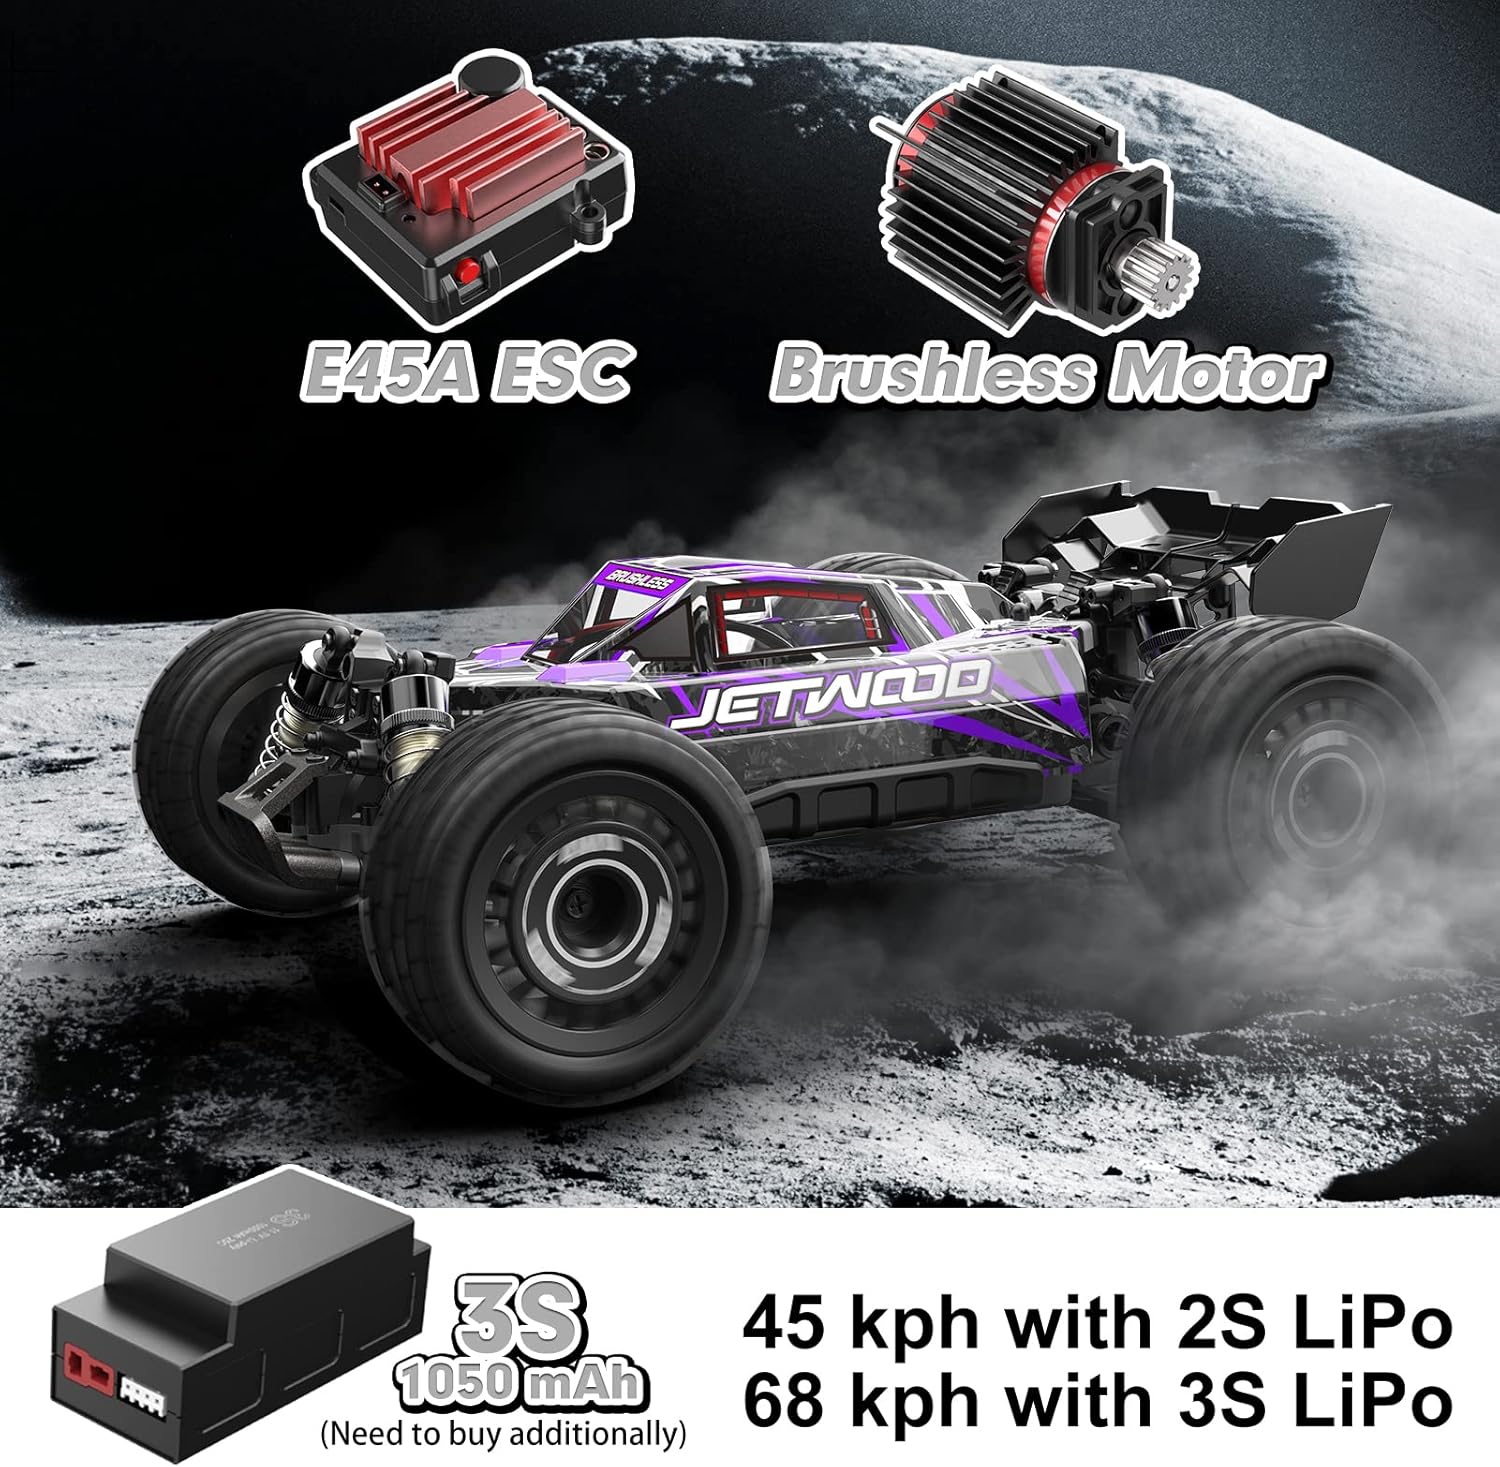 Jetwood 1:16 4X4 Brushless Fast RC Cars for Adults Review